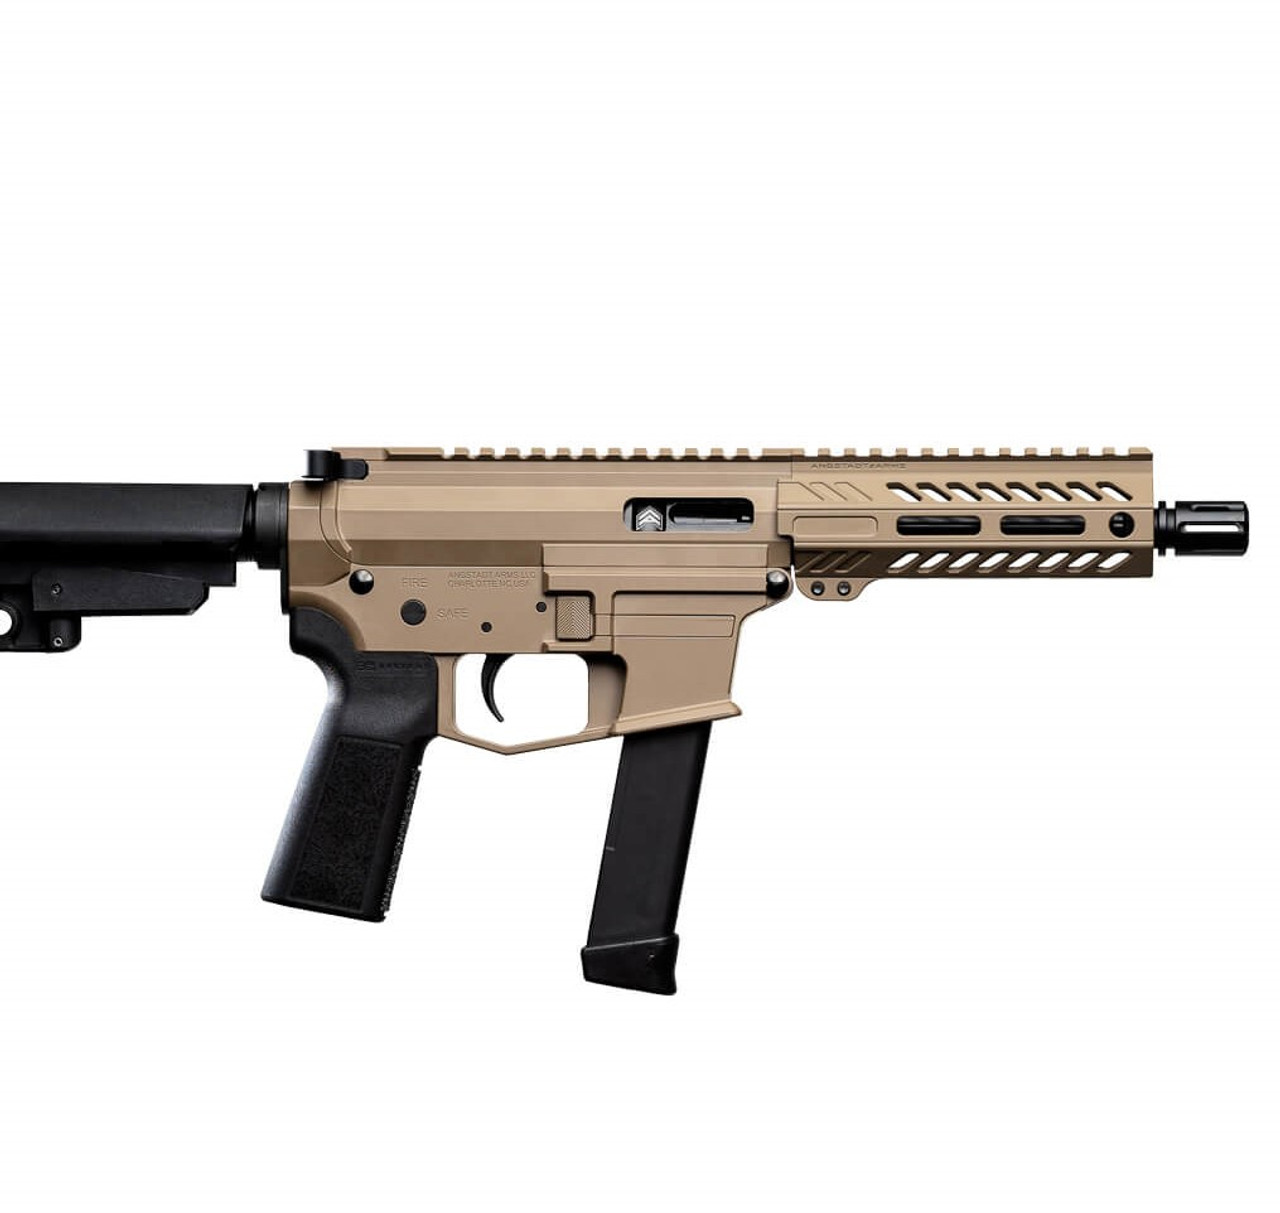 Angstadt Arms UDP-9 PDW Pistol with SB Tactical Brace 9mm - FDE | For Sale